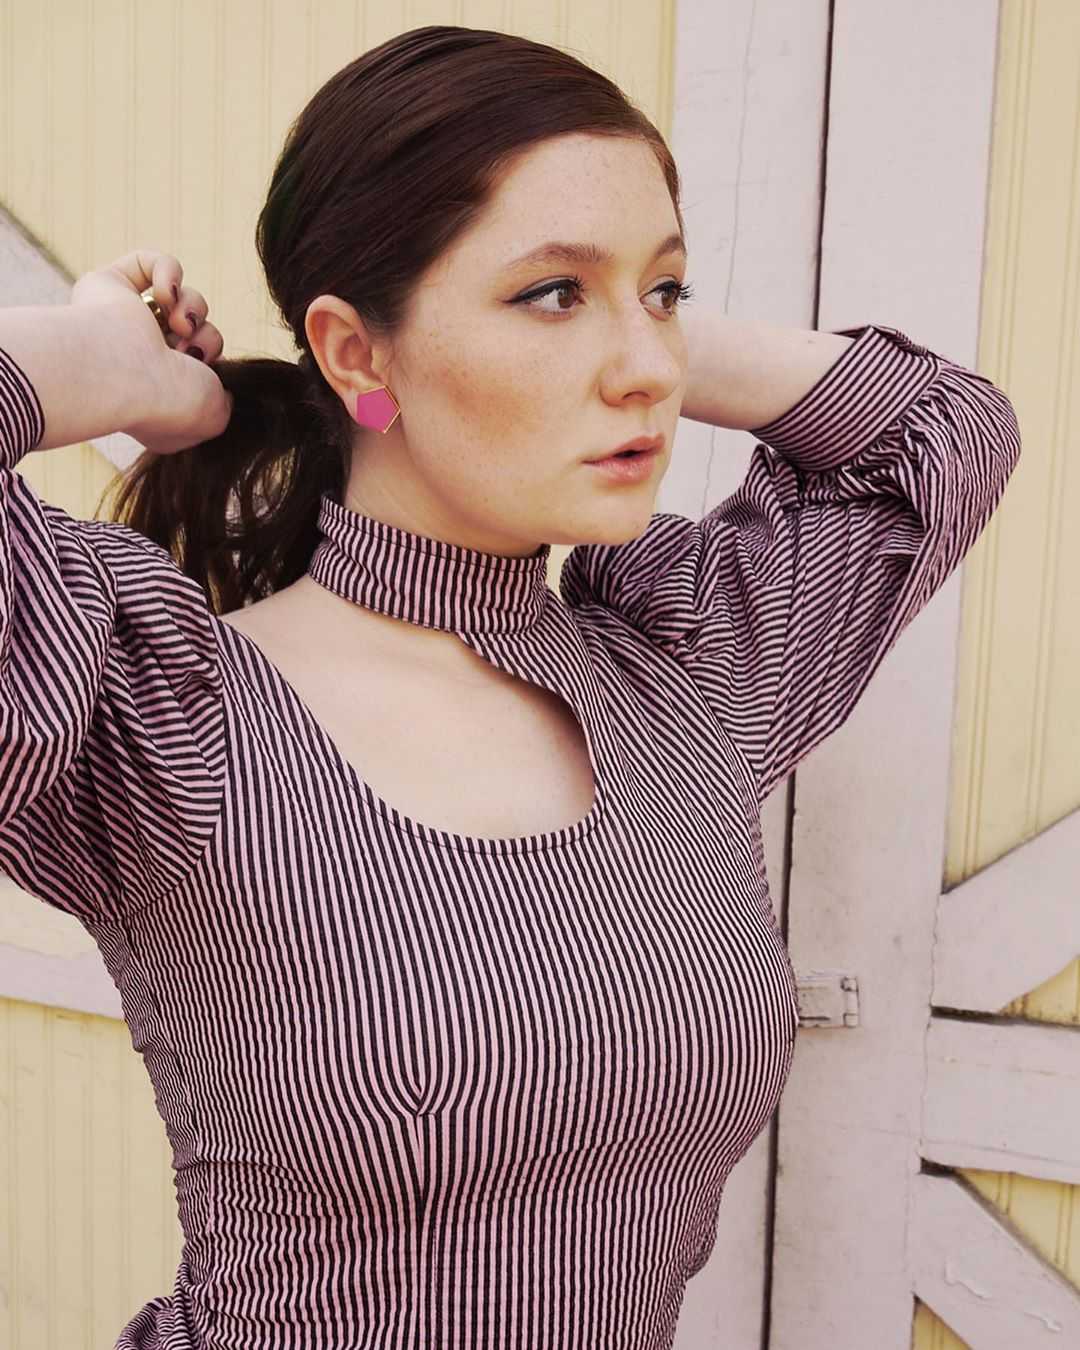 70+ Hot Pictures Of Emma Kenney From Shameless 68